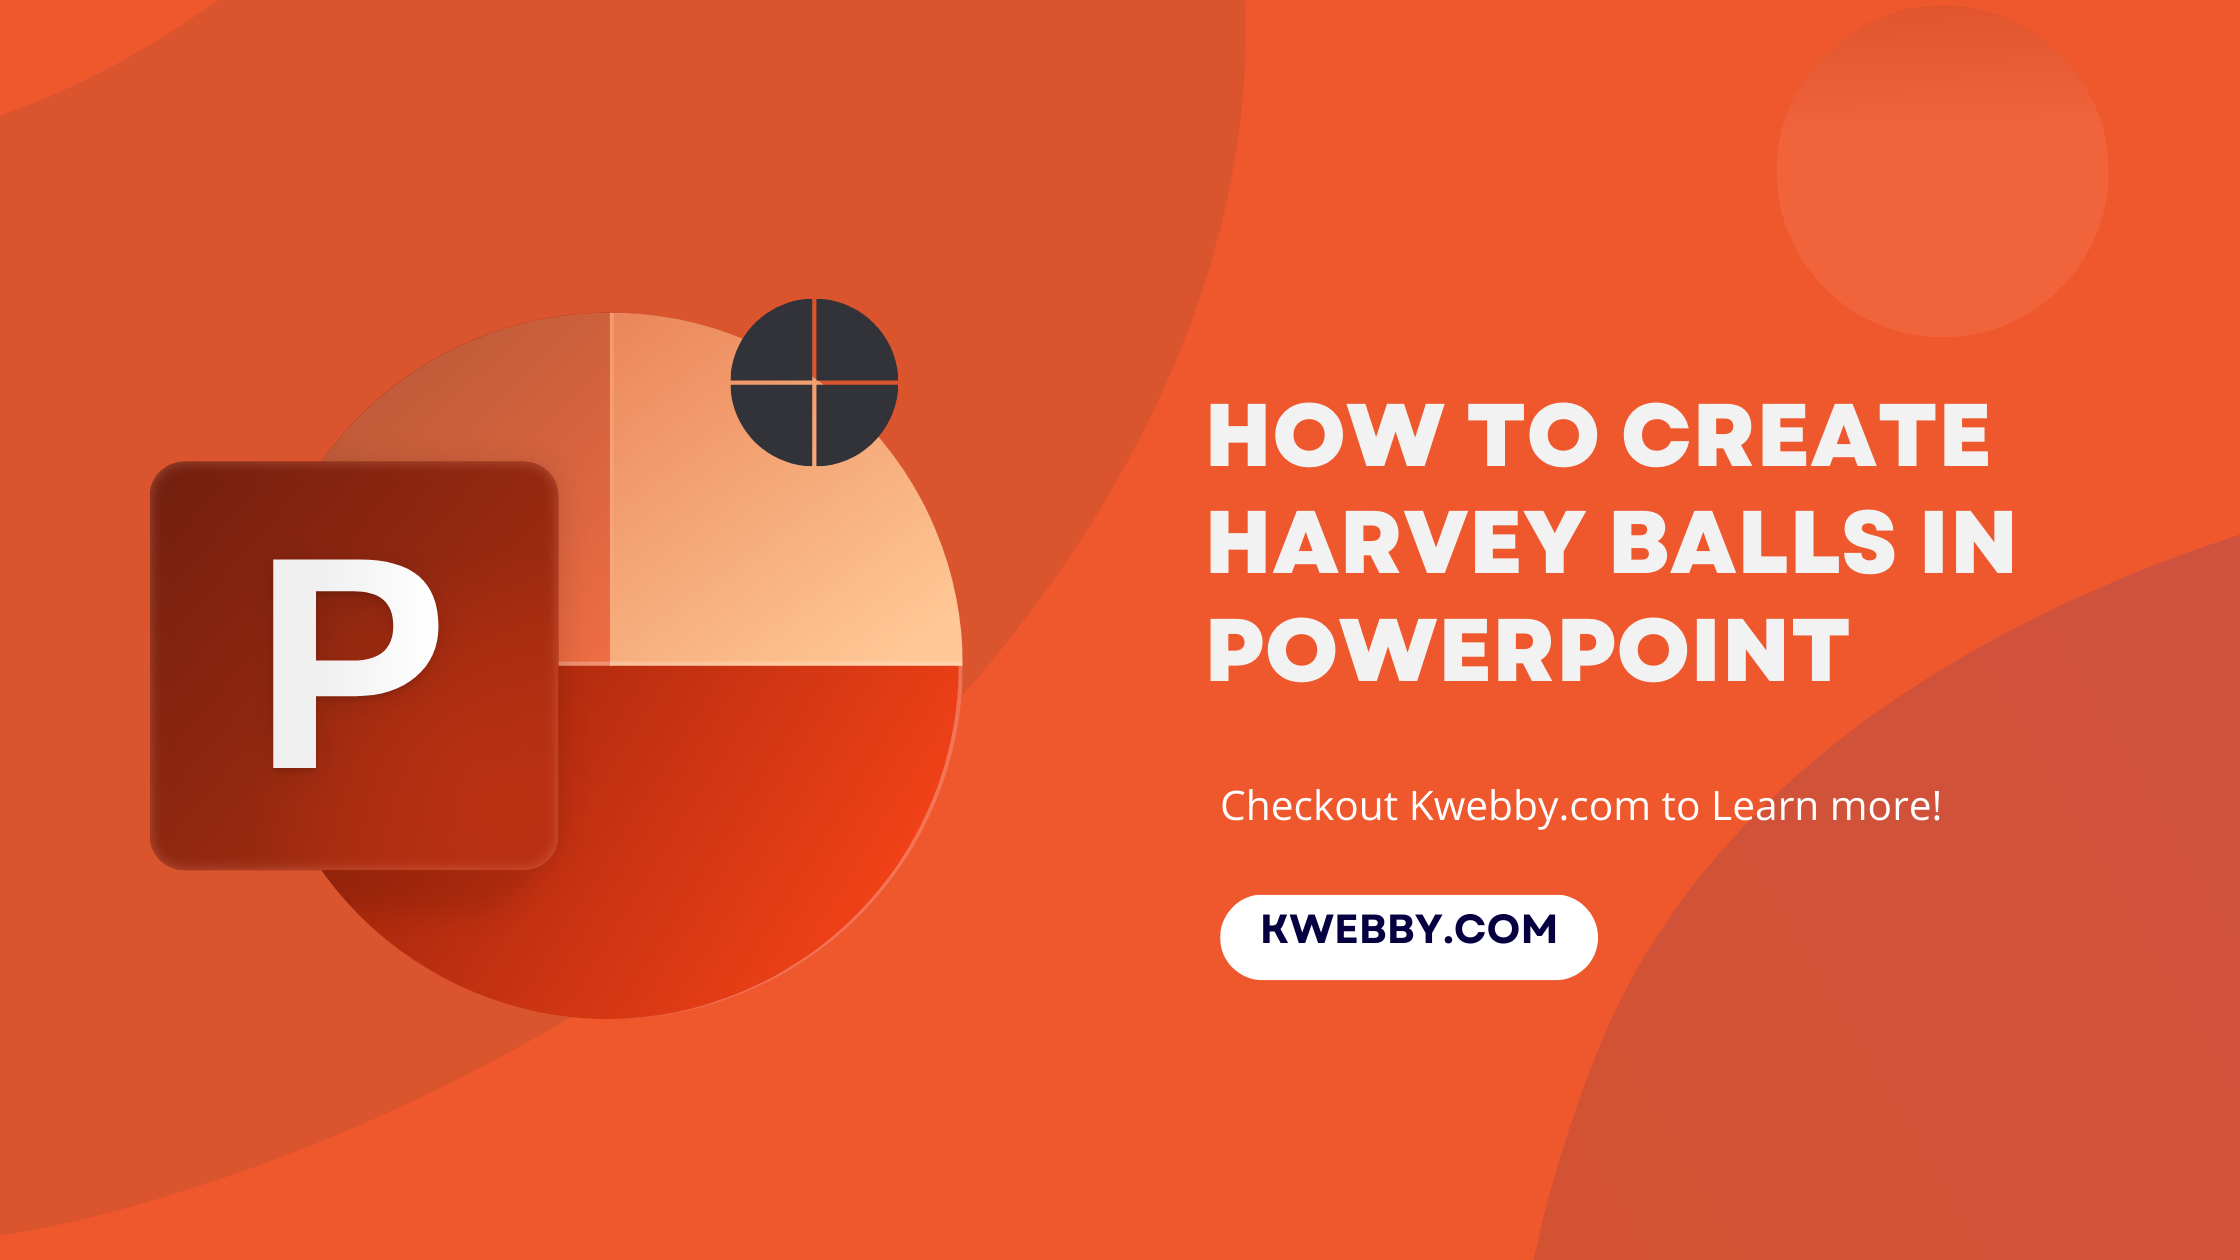 How to create Harvey balls in PowerPoint in a Few Steps